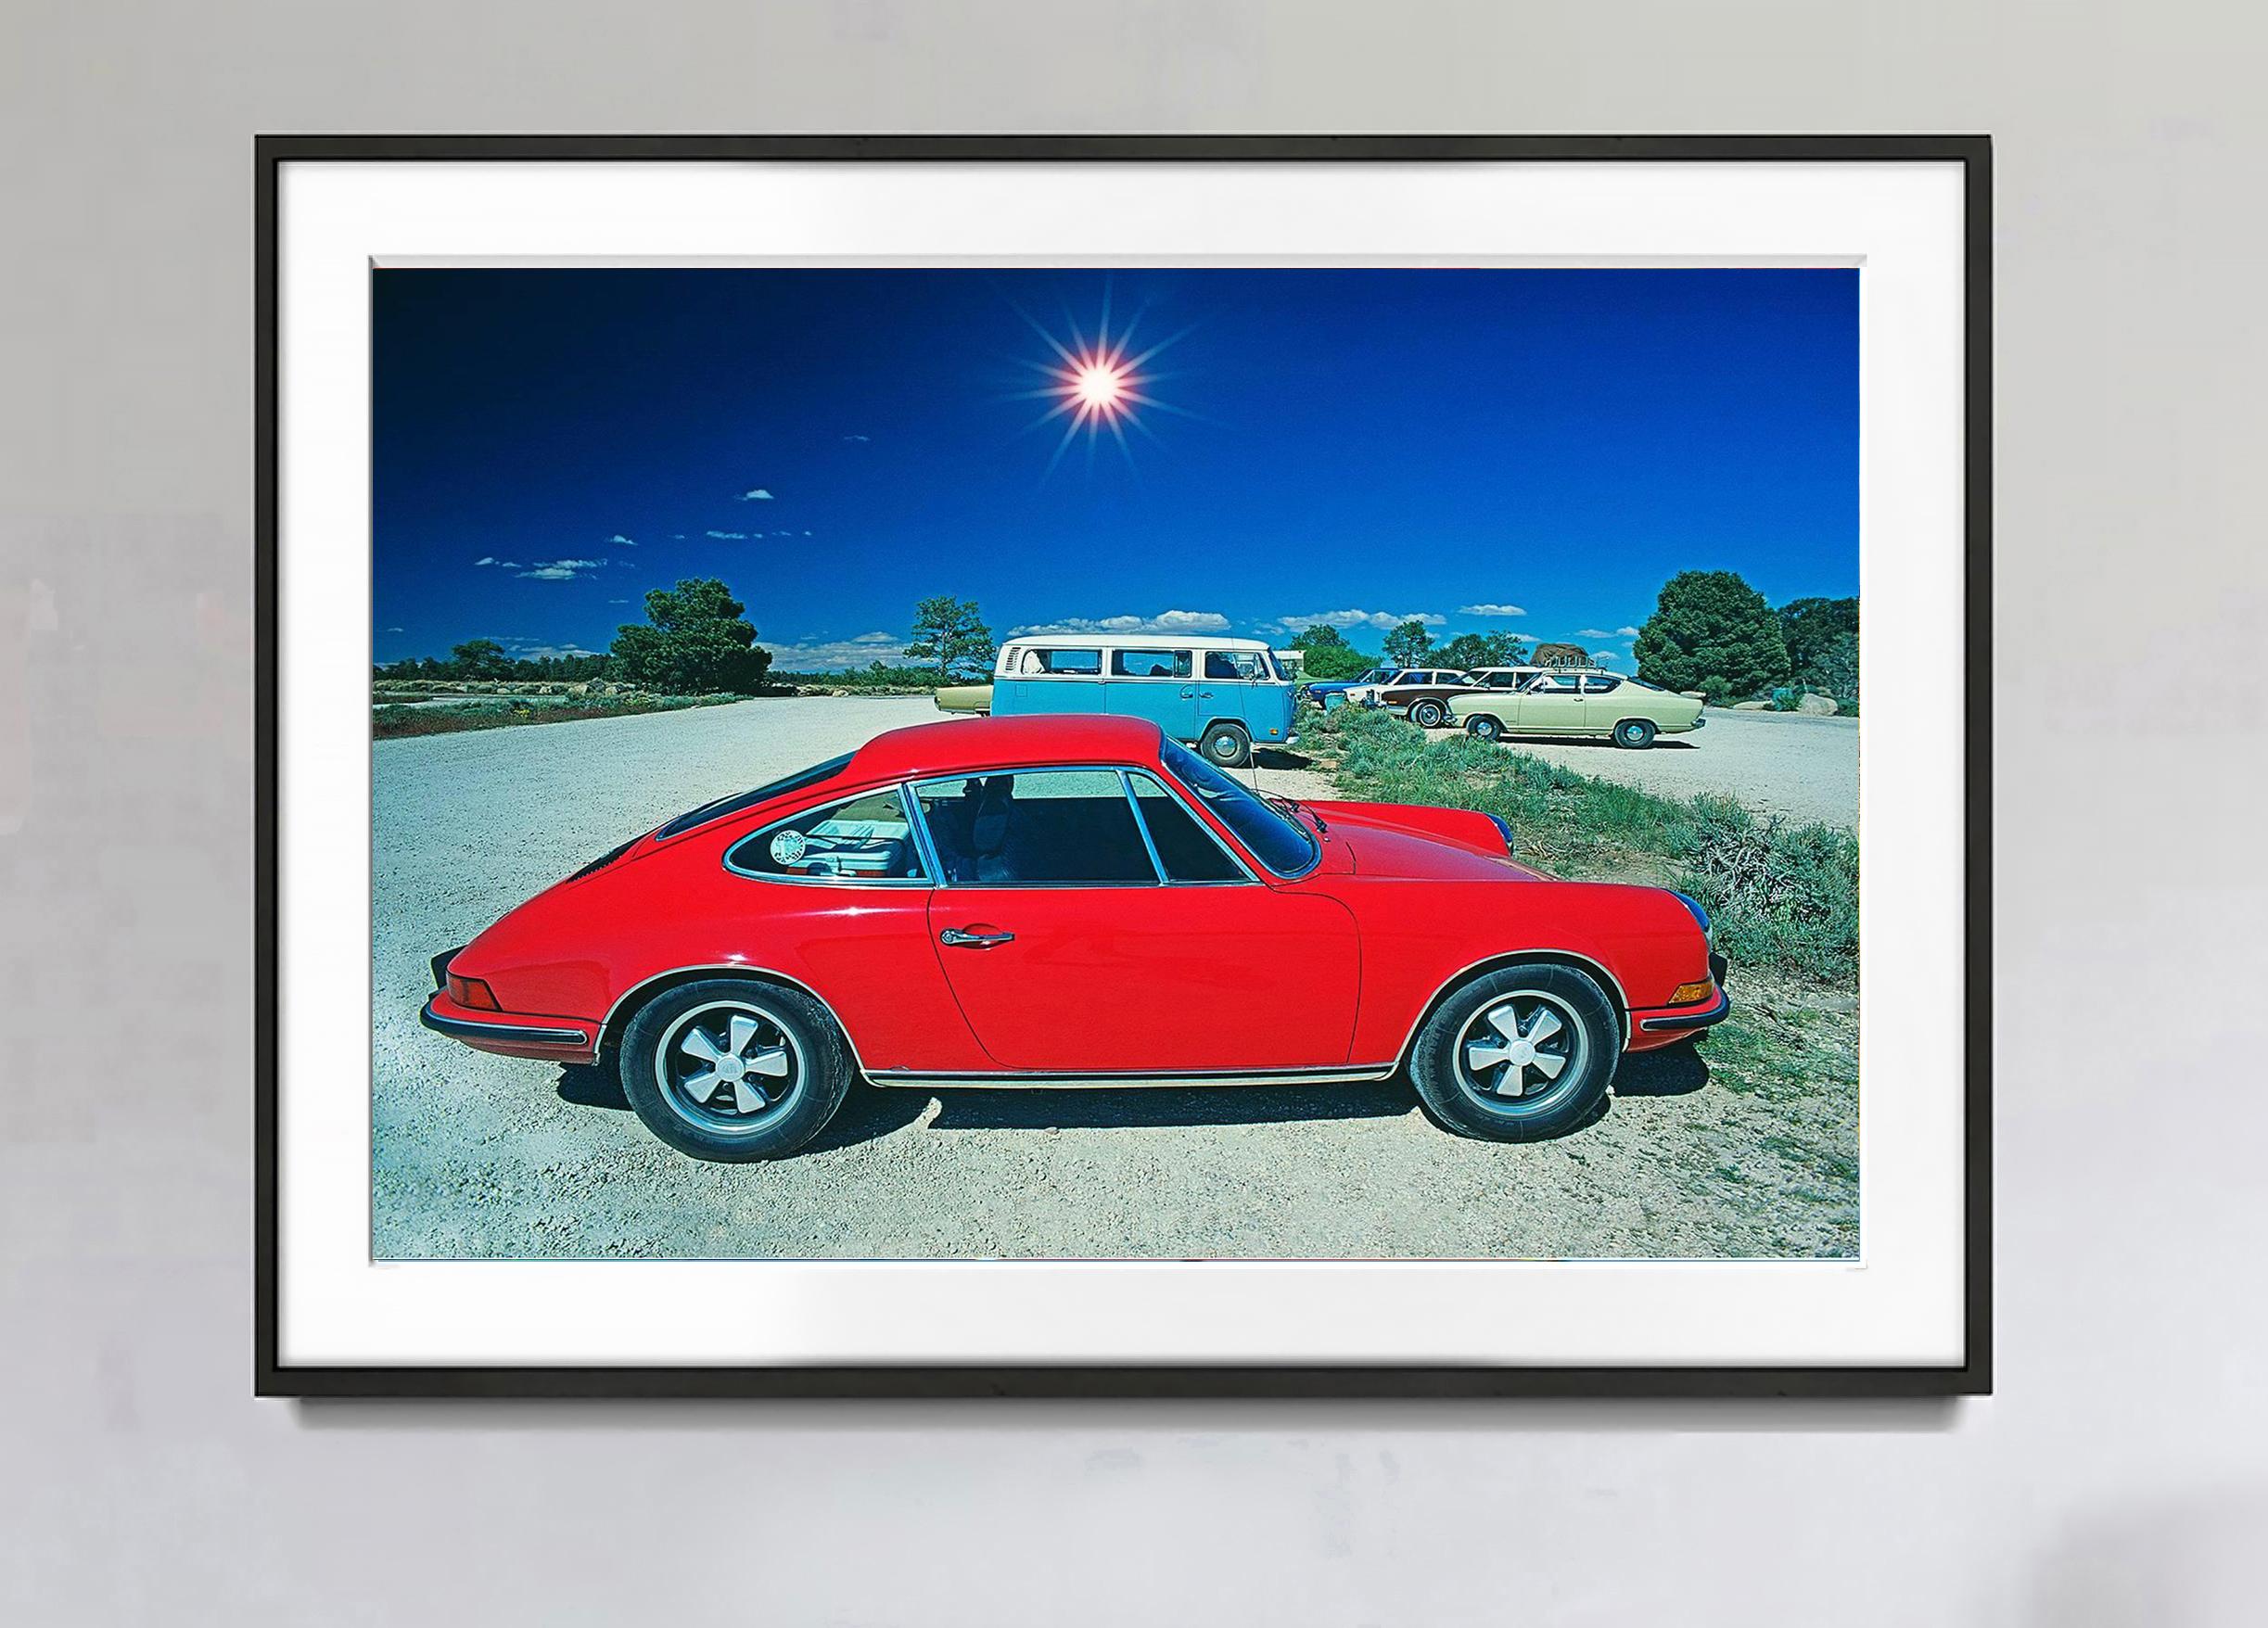 Red Porsche from the 70's - Photograph by Mitchell Funk